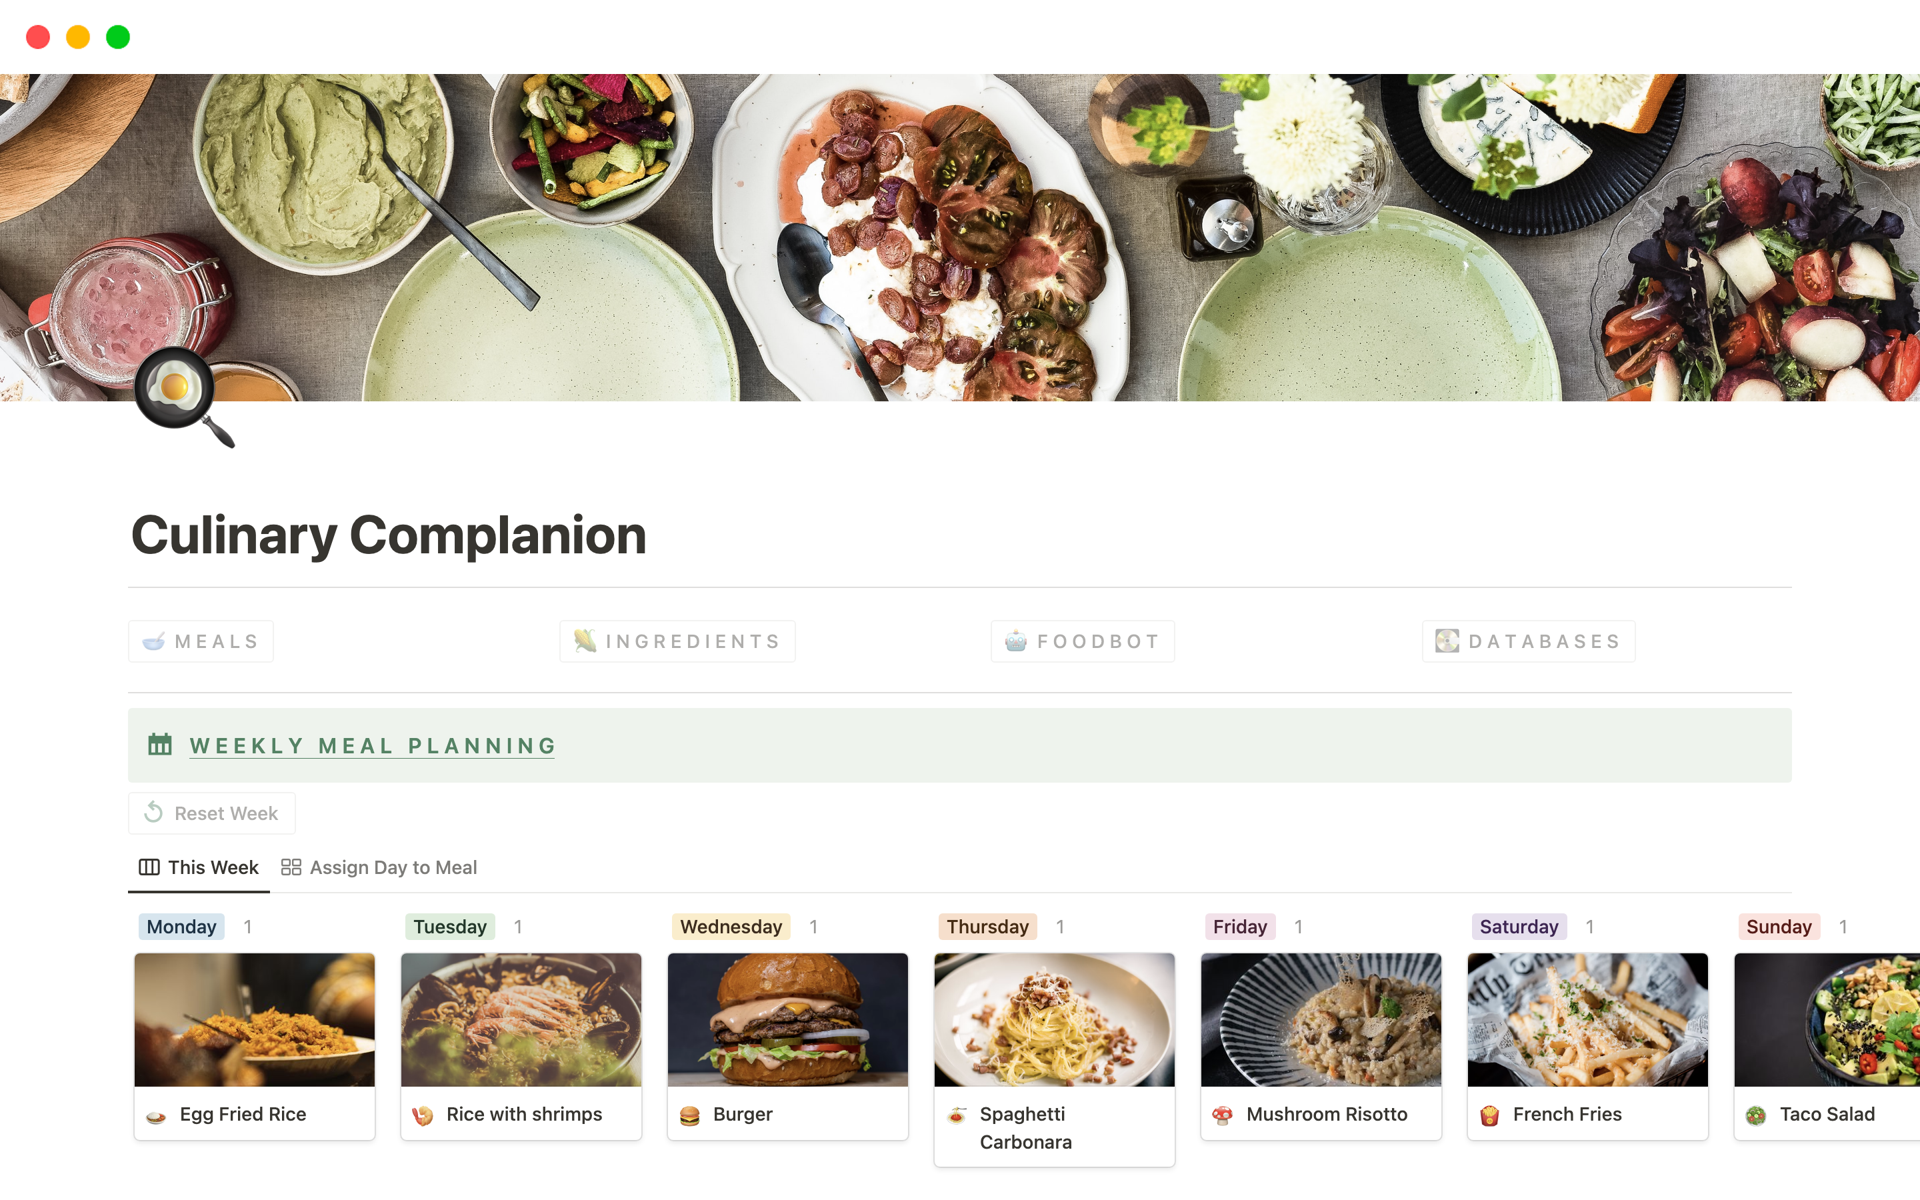 The "Culinary Complanion" Notion template is a versatile meal planning and recipe management tool that offers organized categories, a shopping list, a meal planner, and other features to streamline culinary tasks and enhance cooking experiences.